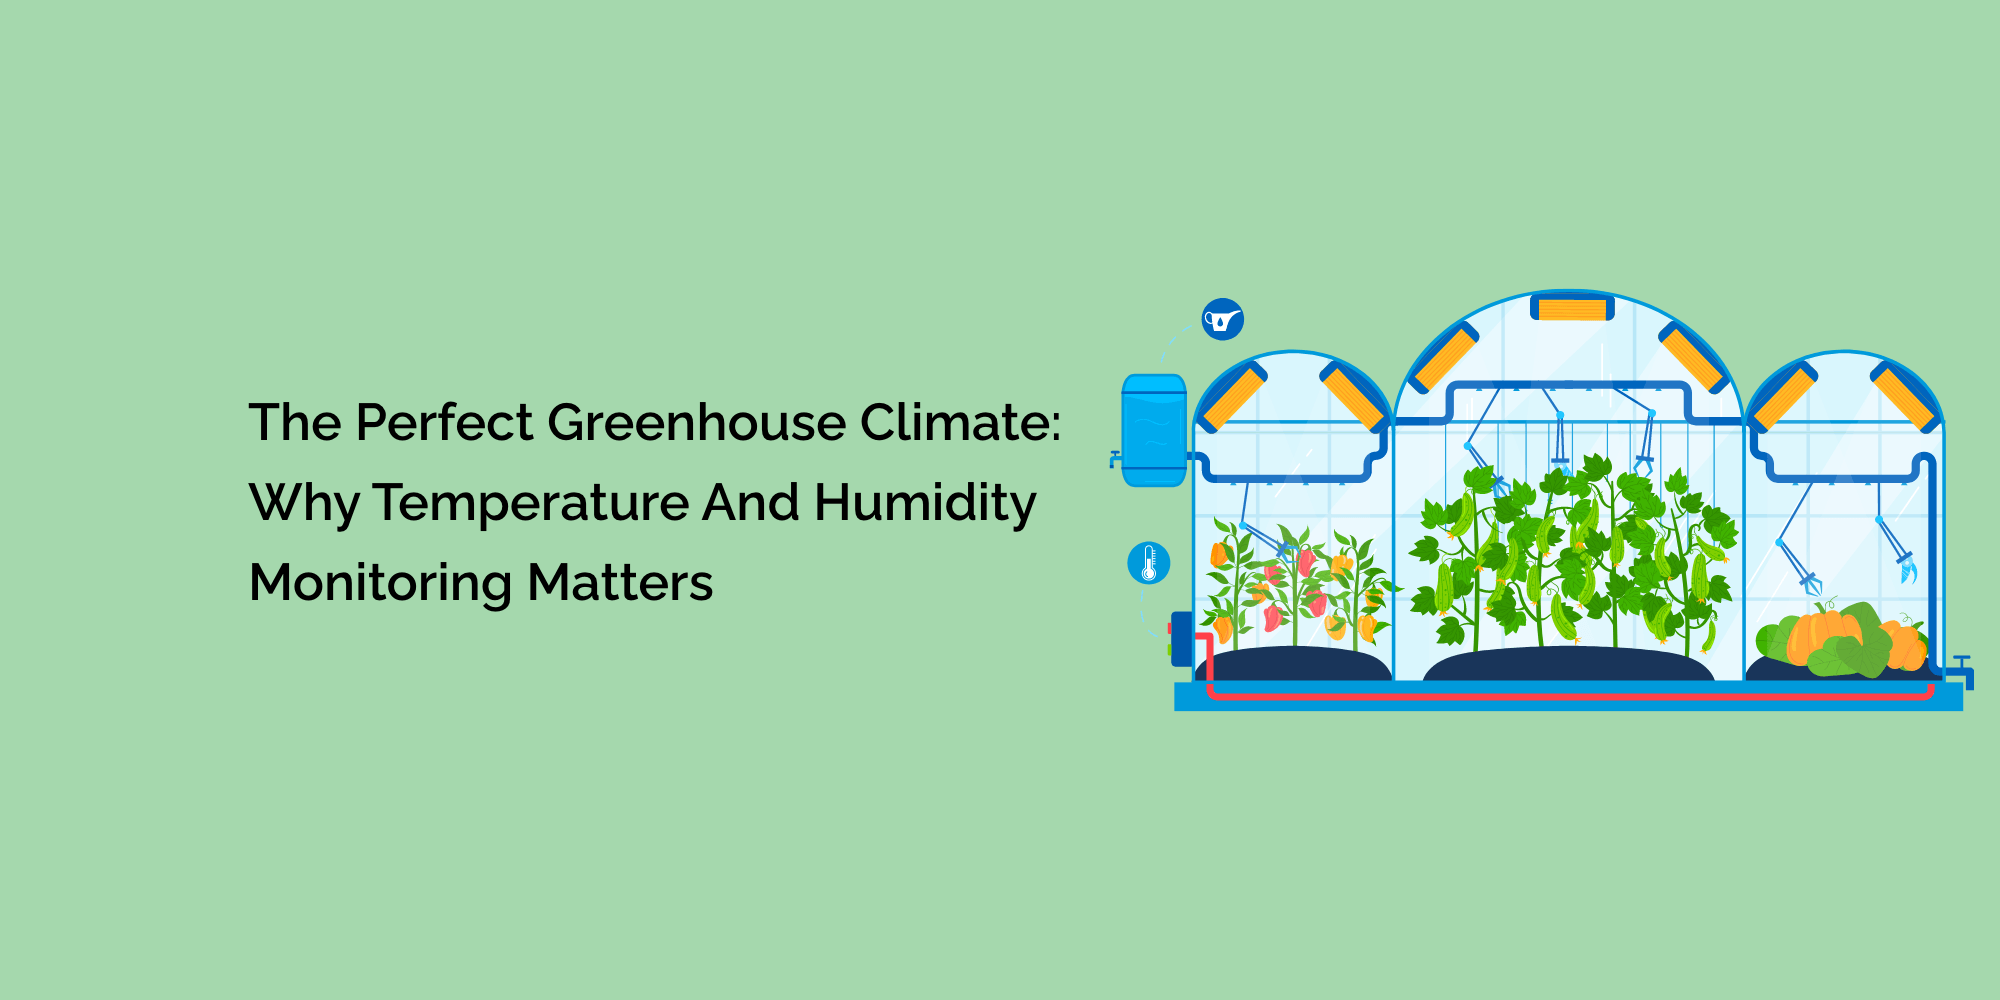 The Perfect Greenhouse Climate: Why Temperature and Humidity Monitoring Matters